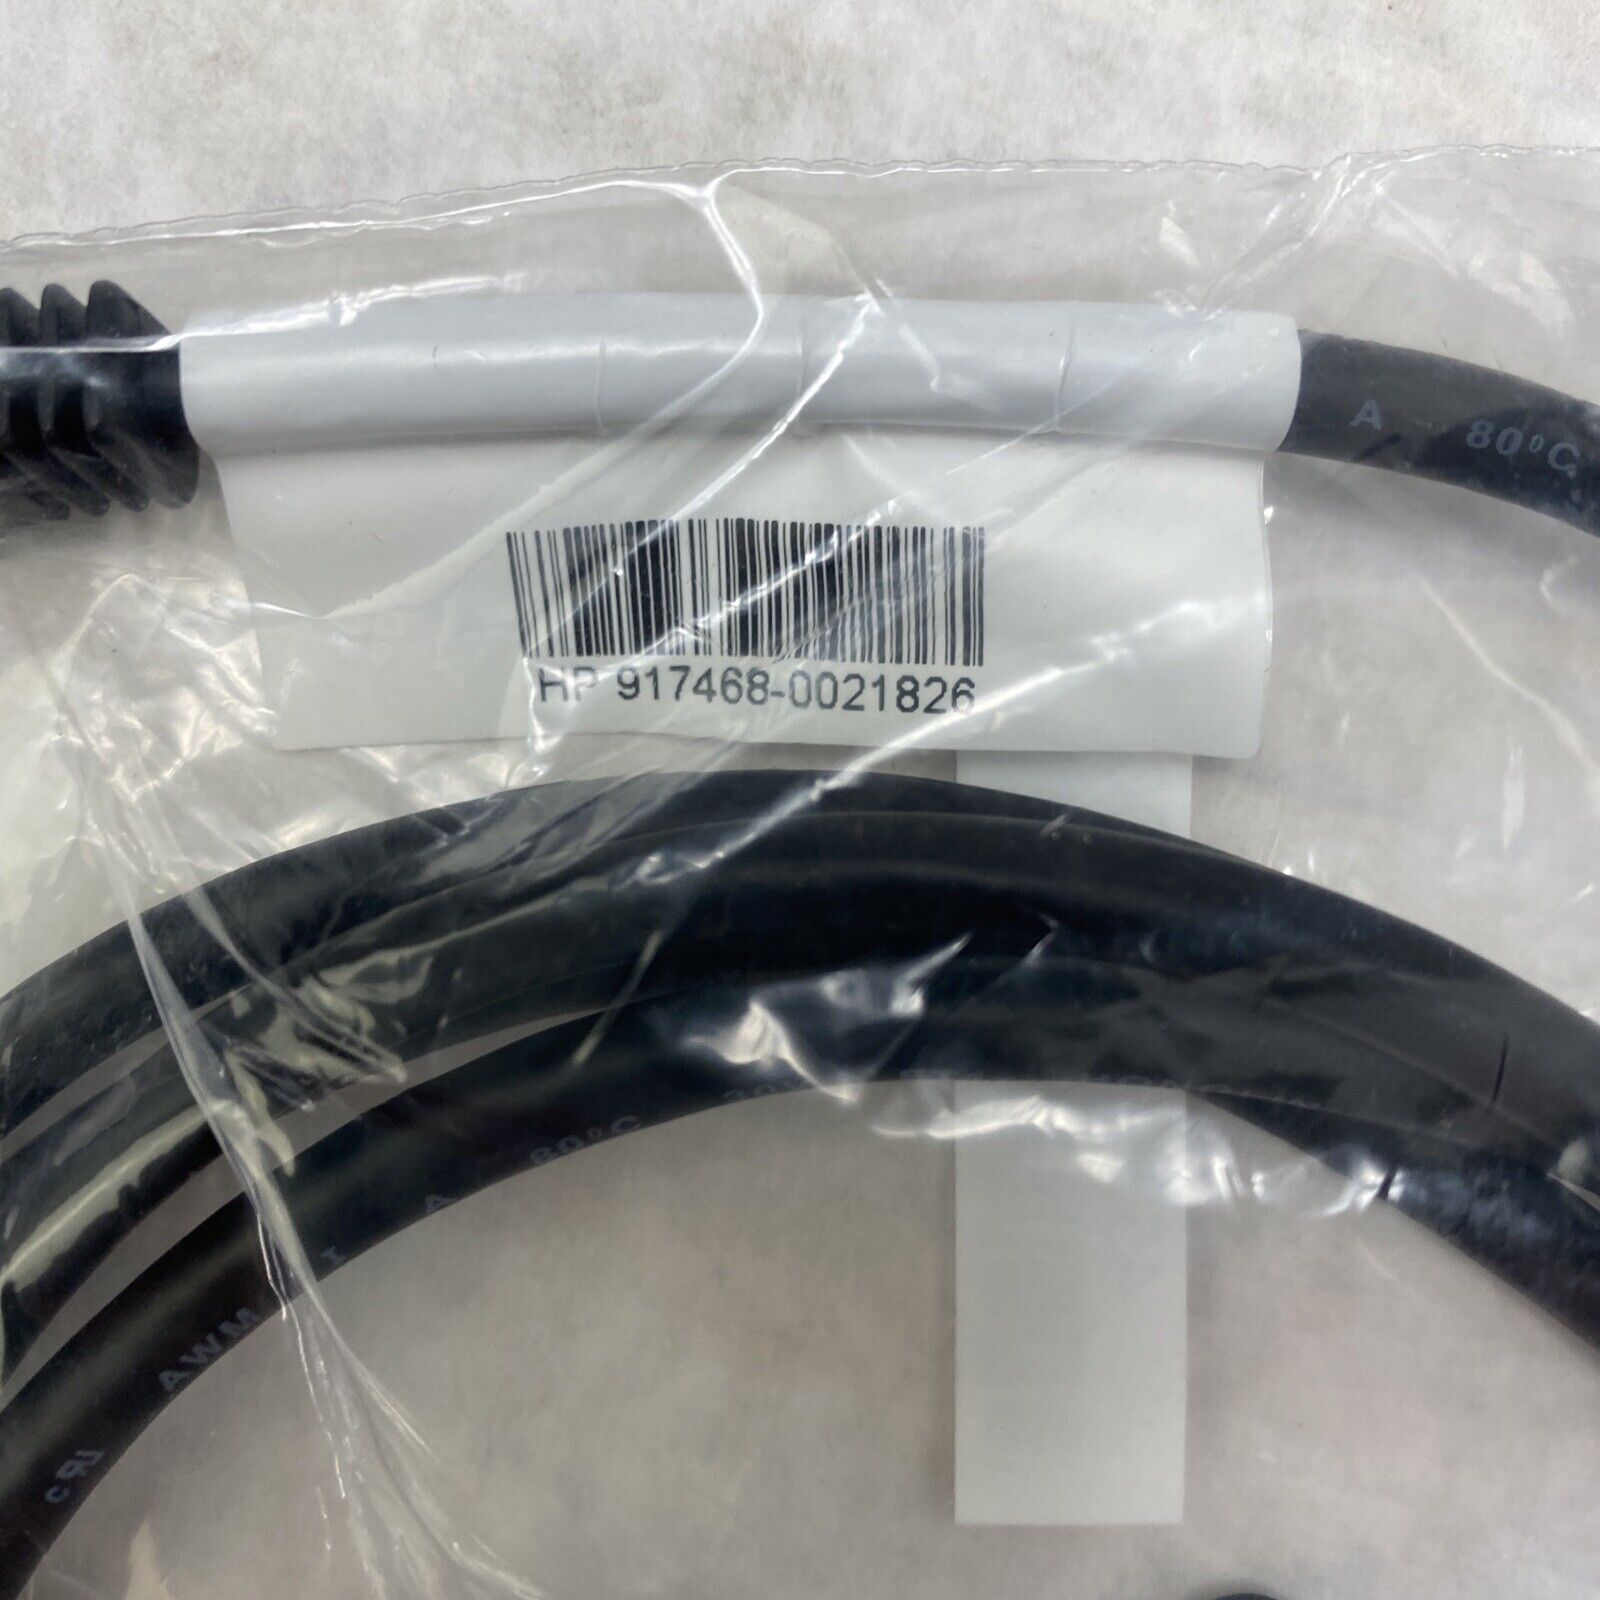 Lot(10) Genuine HP 917468 SS USB 3.0 Cable A-Male to B-Male 6ft Black